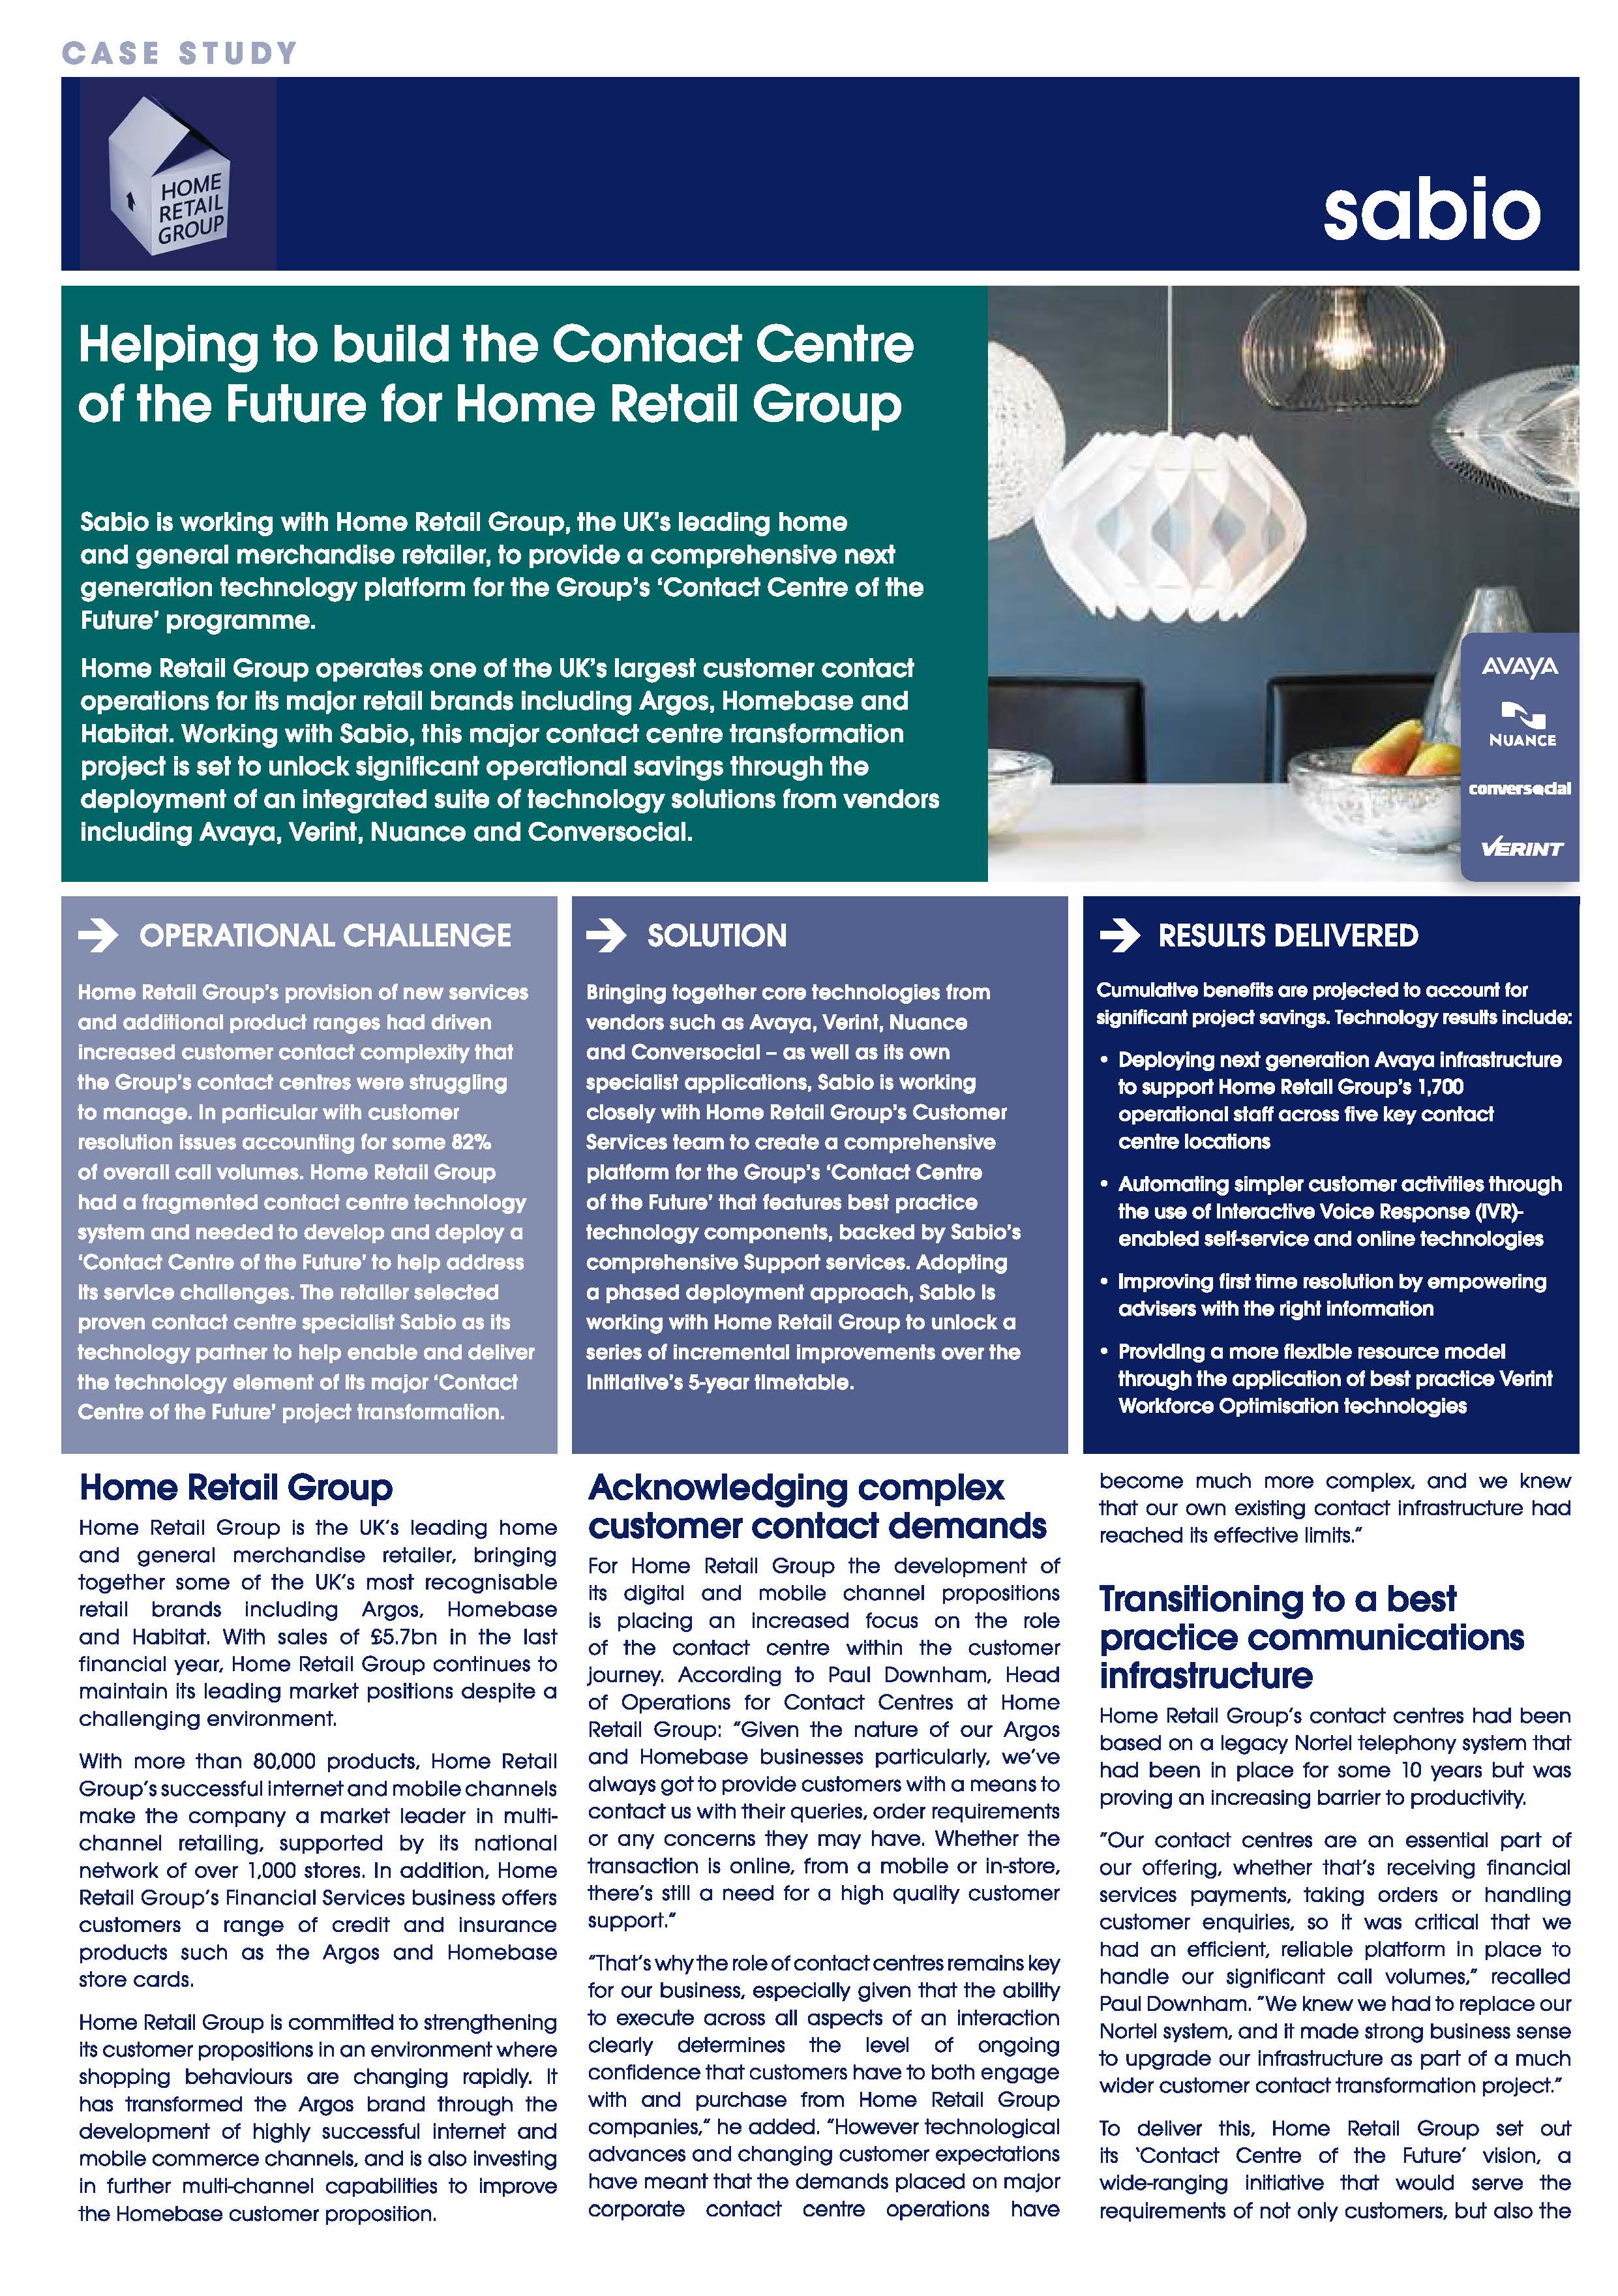 Helping to build the Contact Centre of the Future for Home Retail Group